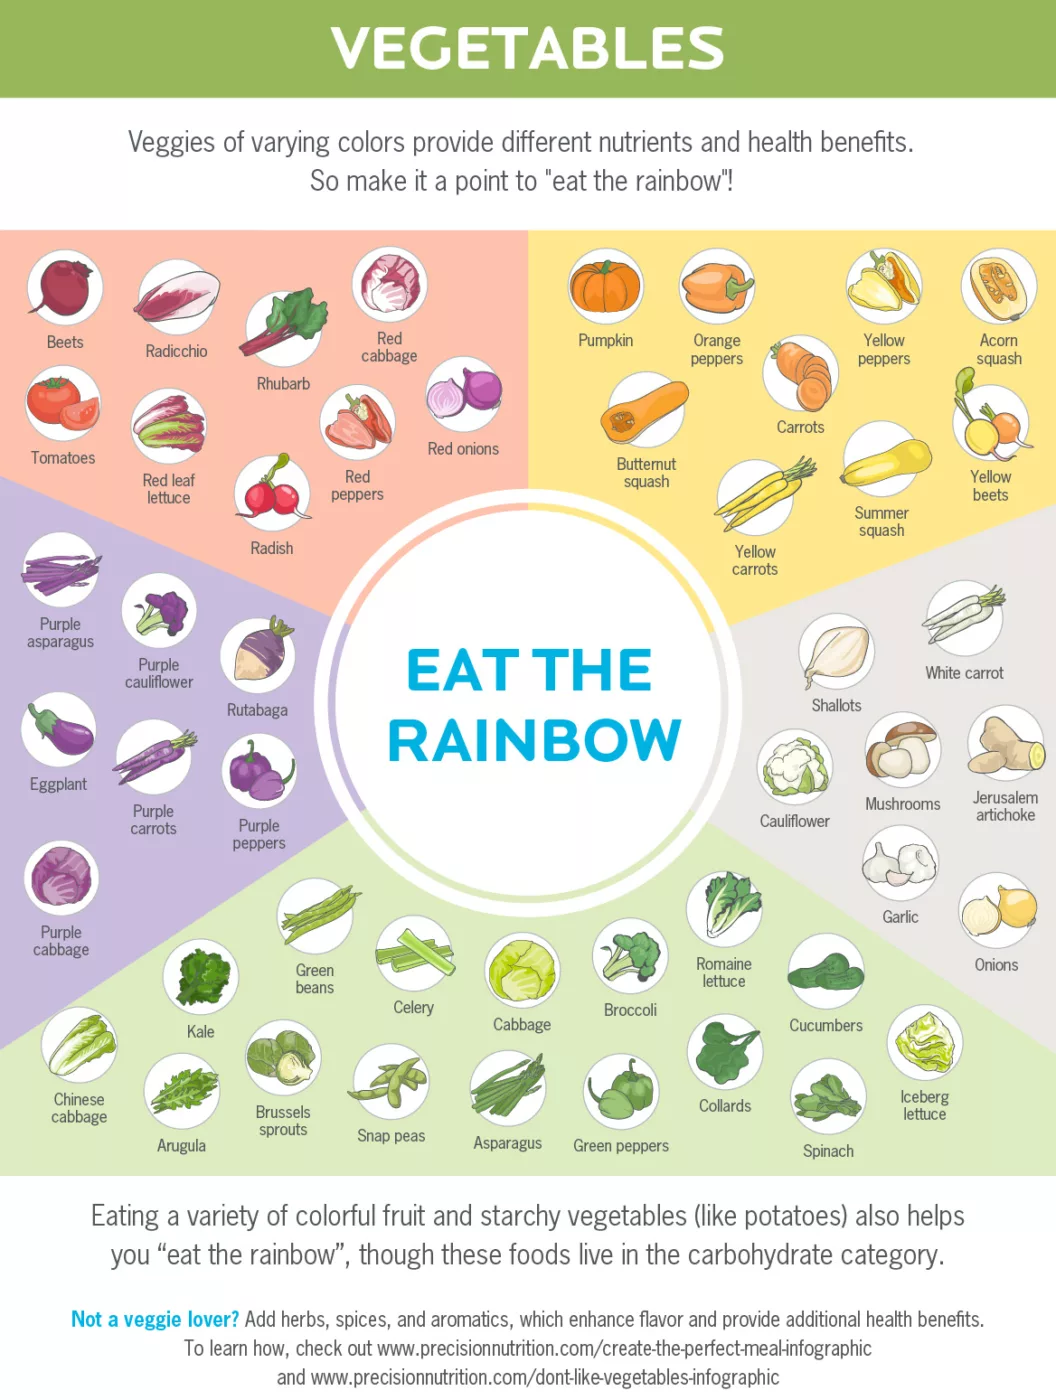 Real Food: Veggies of varying colors provide different nutrients and health benefits.
So make it a point to "eat the rainbow"!